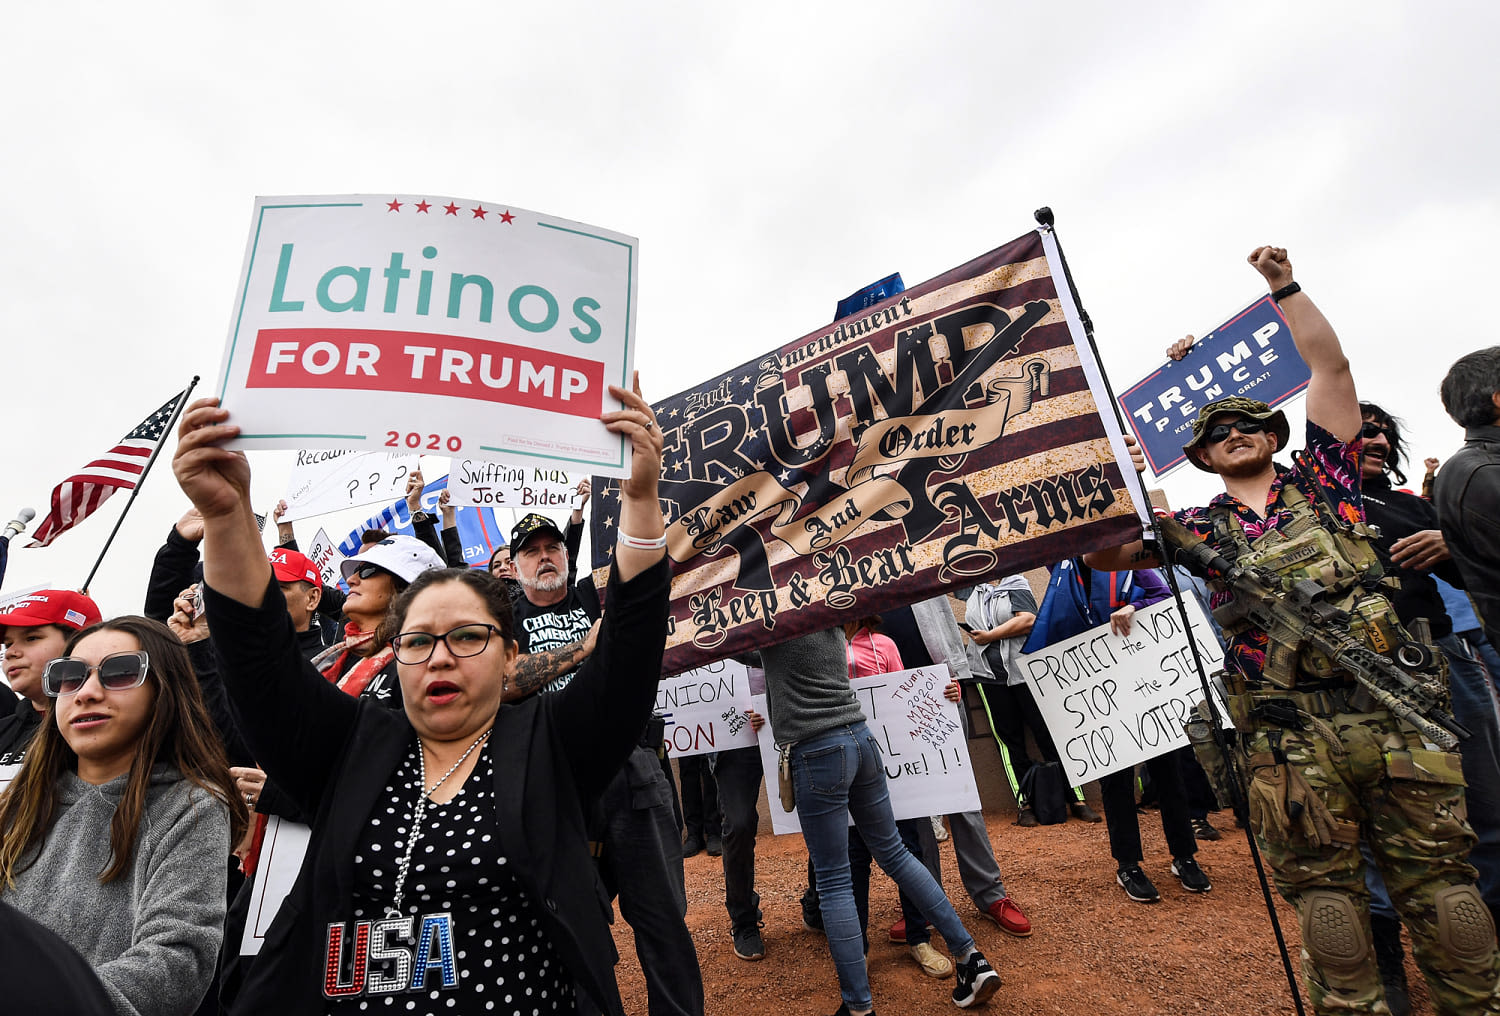 'Latinos for Trump' rebrands and is set to launch as 'Latino Americans for Trump'